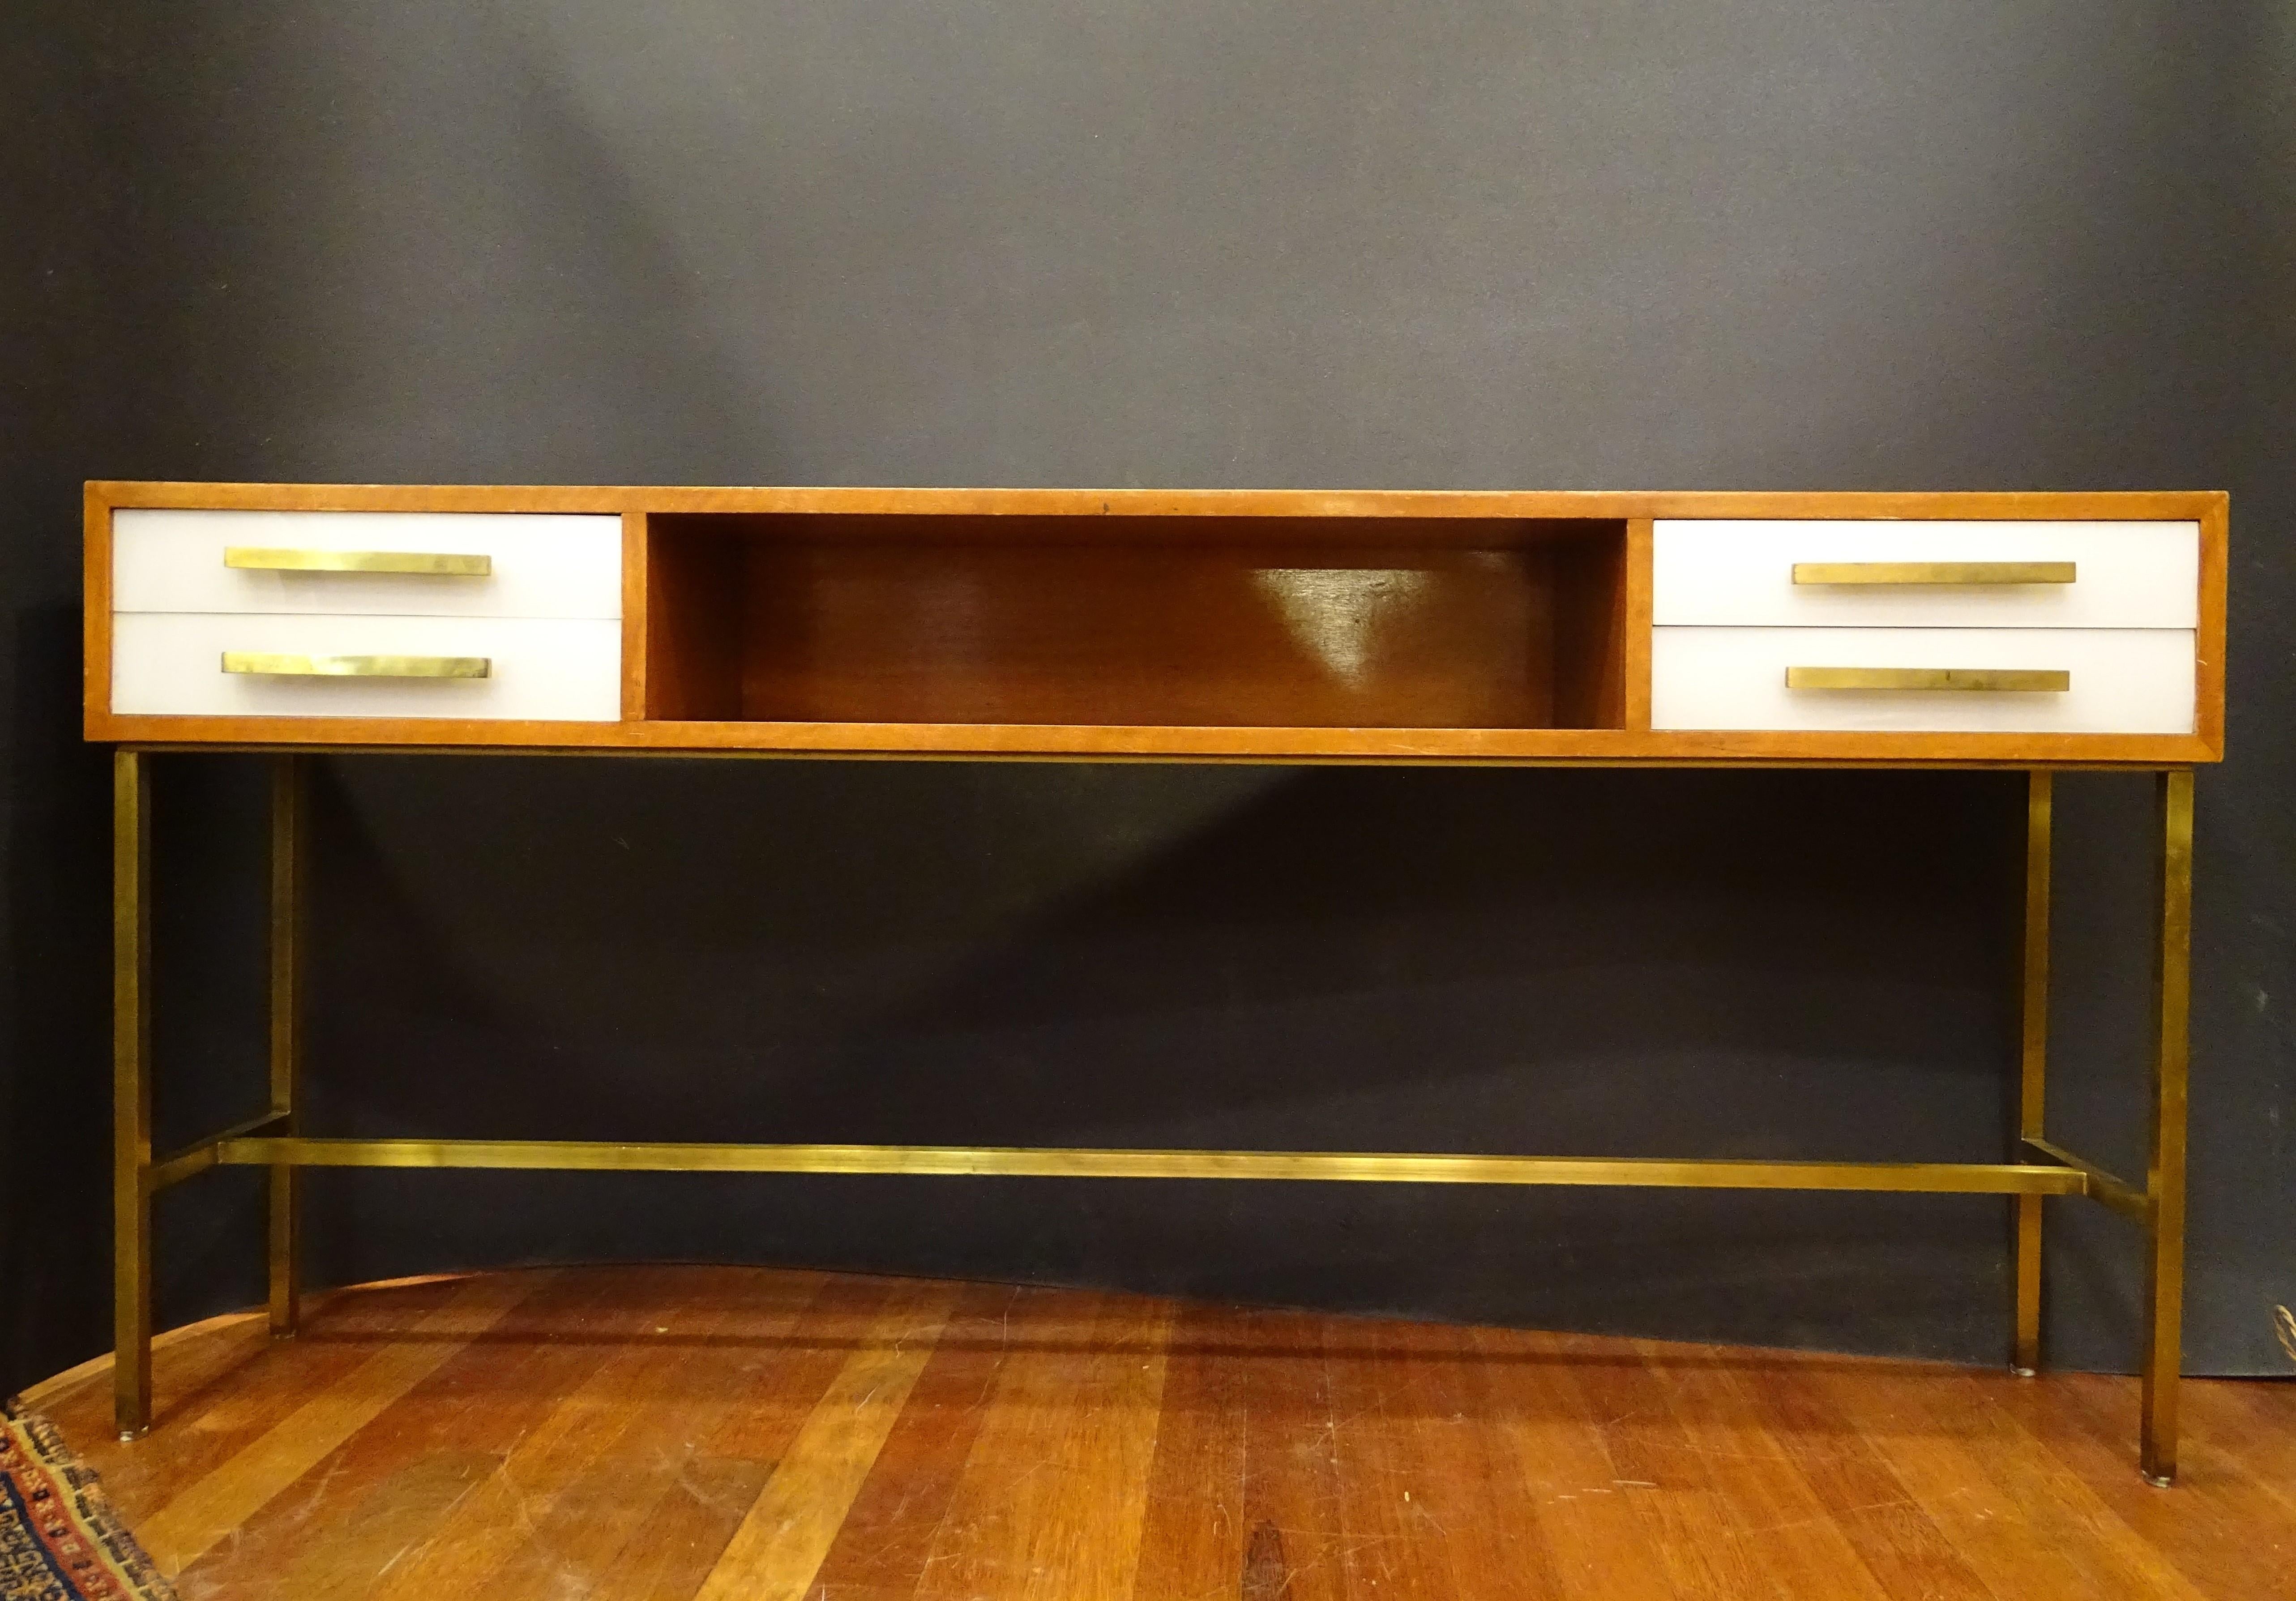 Amazing and beautiful console table with drawers, Italian design furniture from the 50s, made of blond mahogany wood in very good condition, with white Murano glass drawers and a golden brass structure. Perfect to be placed as a home hall, as an